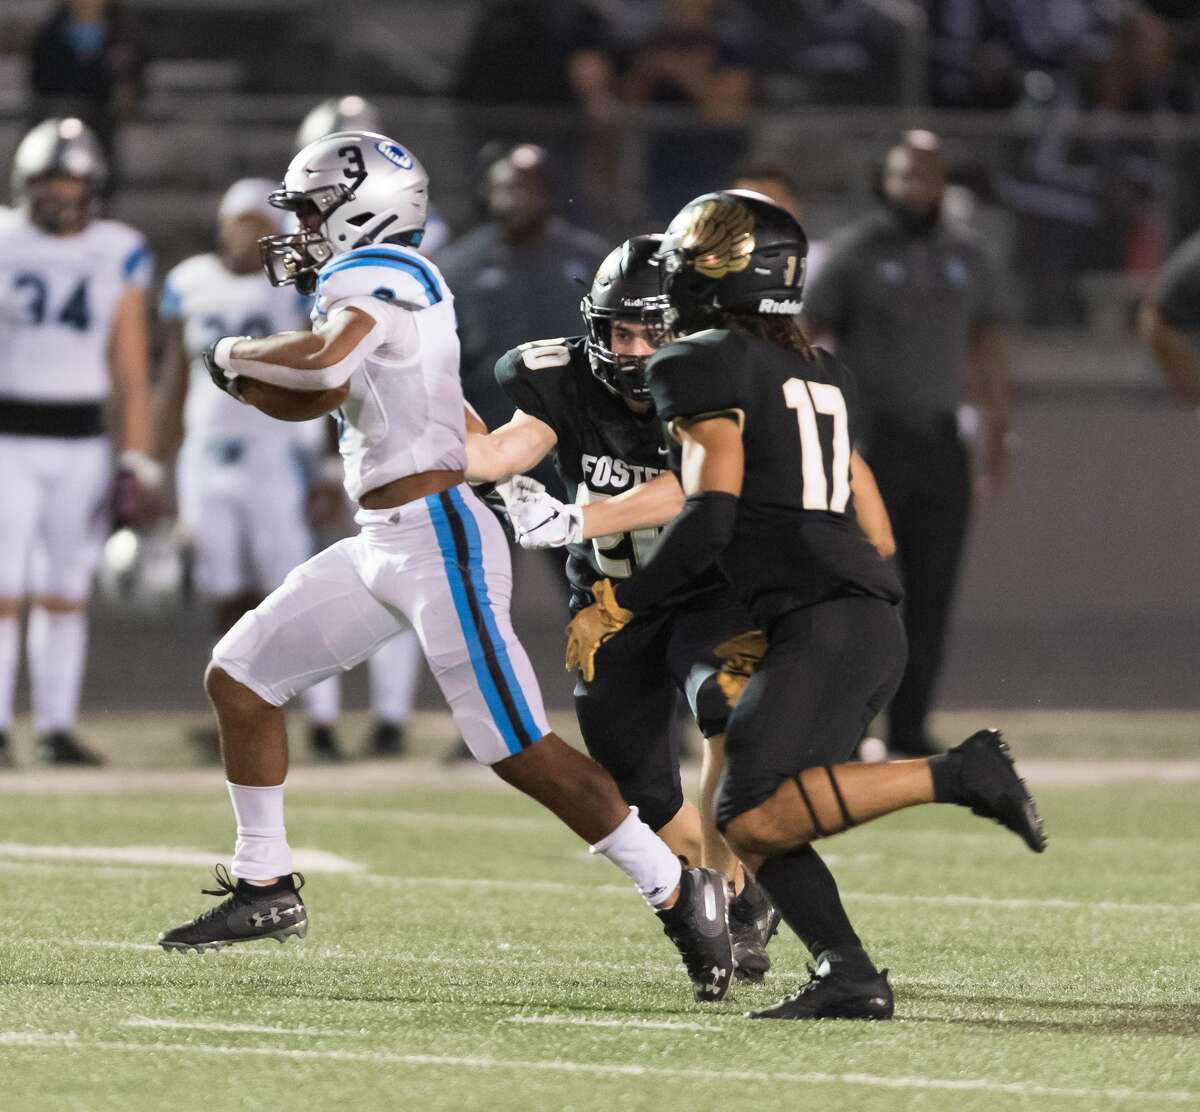 Kelvon Brown (3) of the Shadow Creek Sharks breaks from the grip of Ethan Kappes (20) of the Foster Falcons for a long run in the second half in a high school football game on Thursday, October 24, 2019 at Traylor Stadium in Rosenberg Texas.